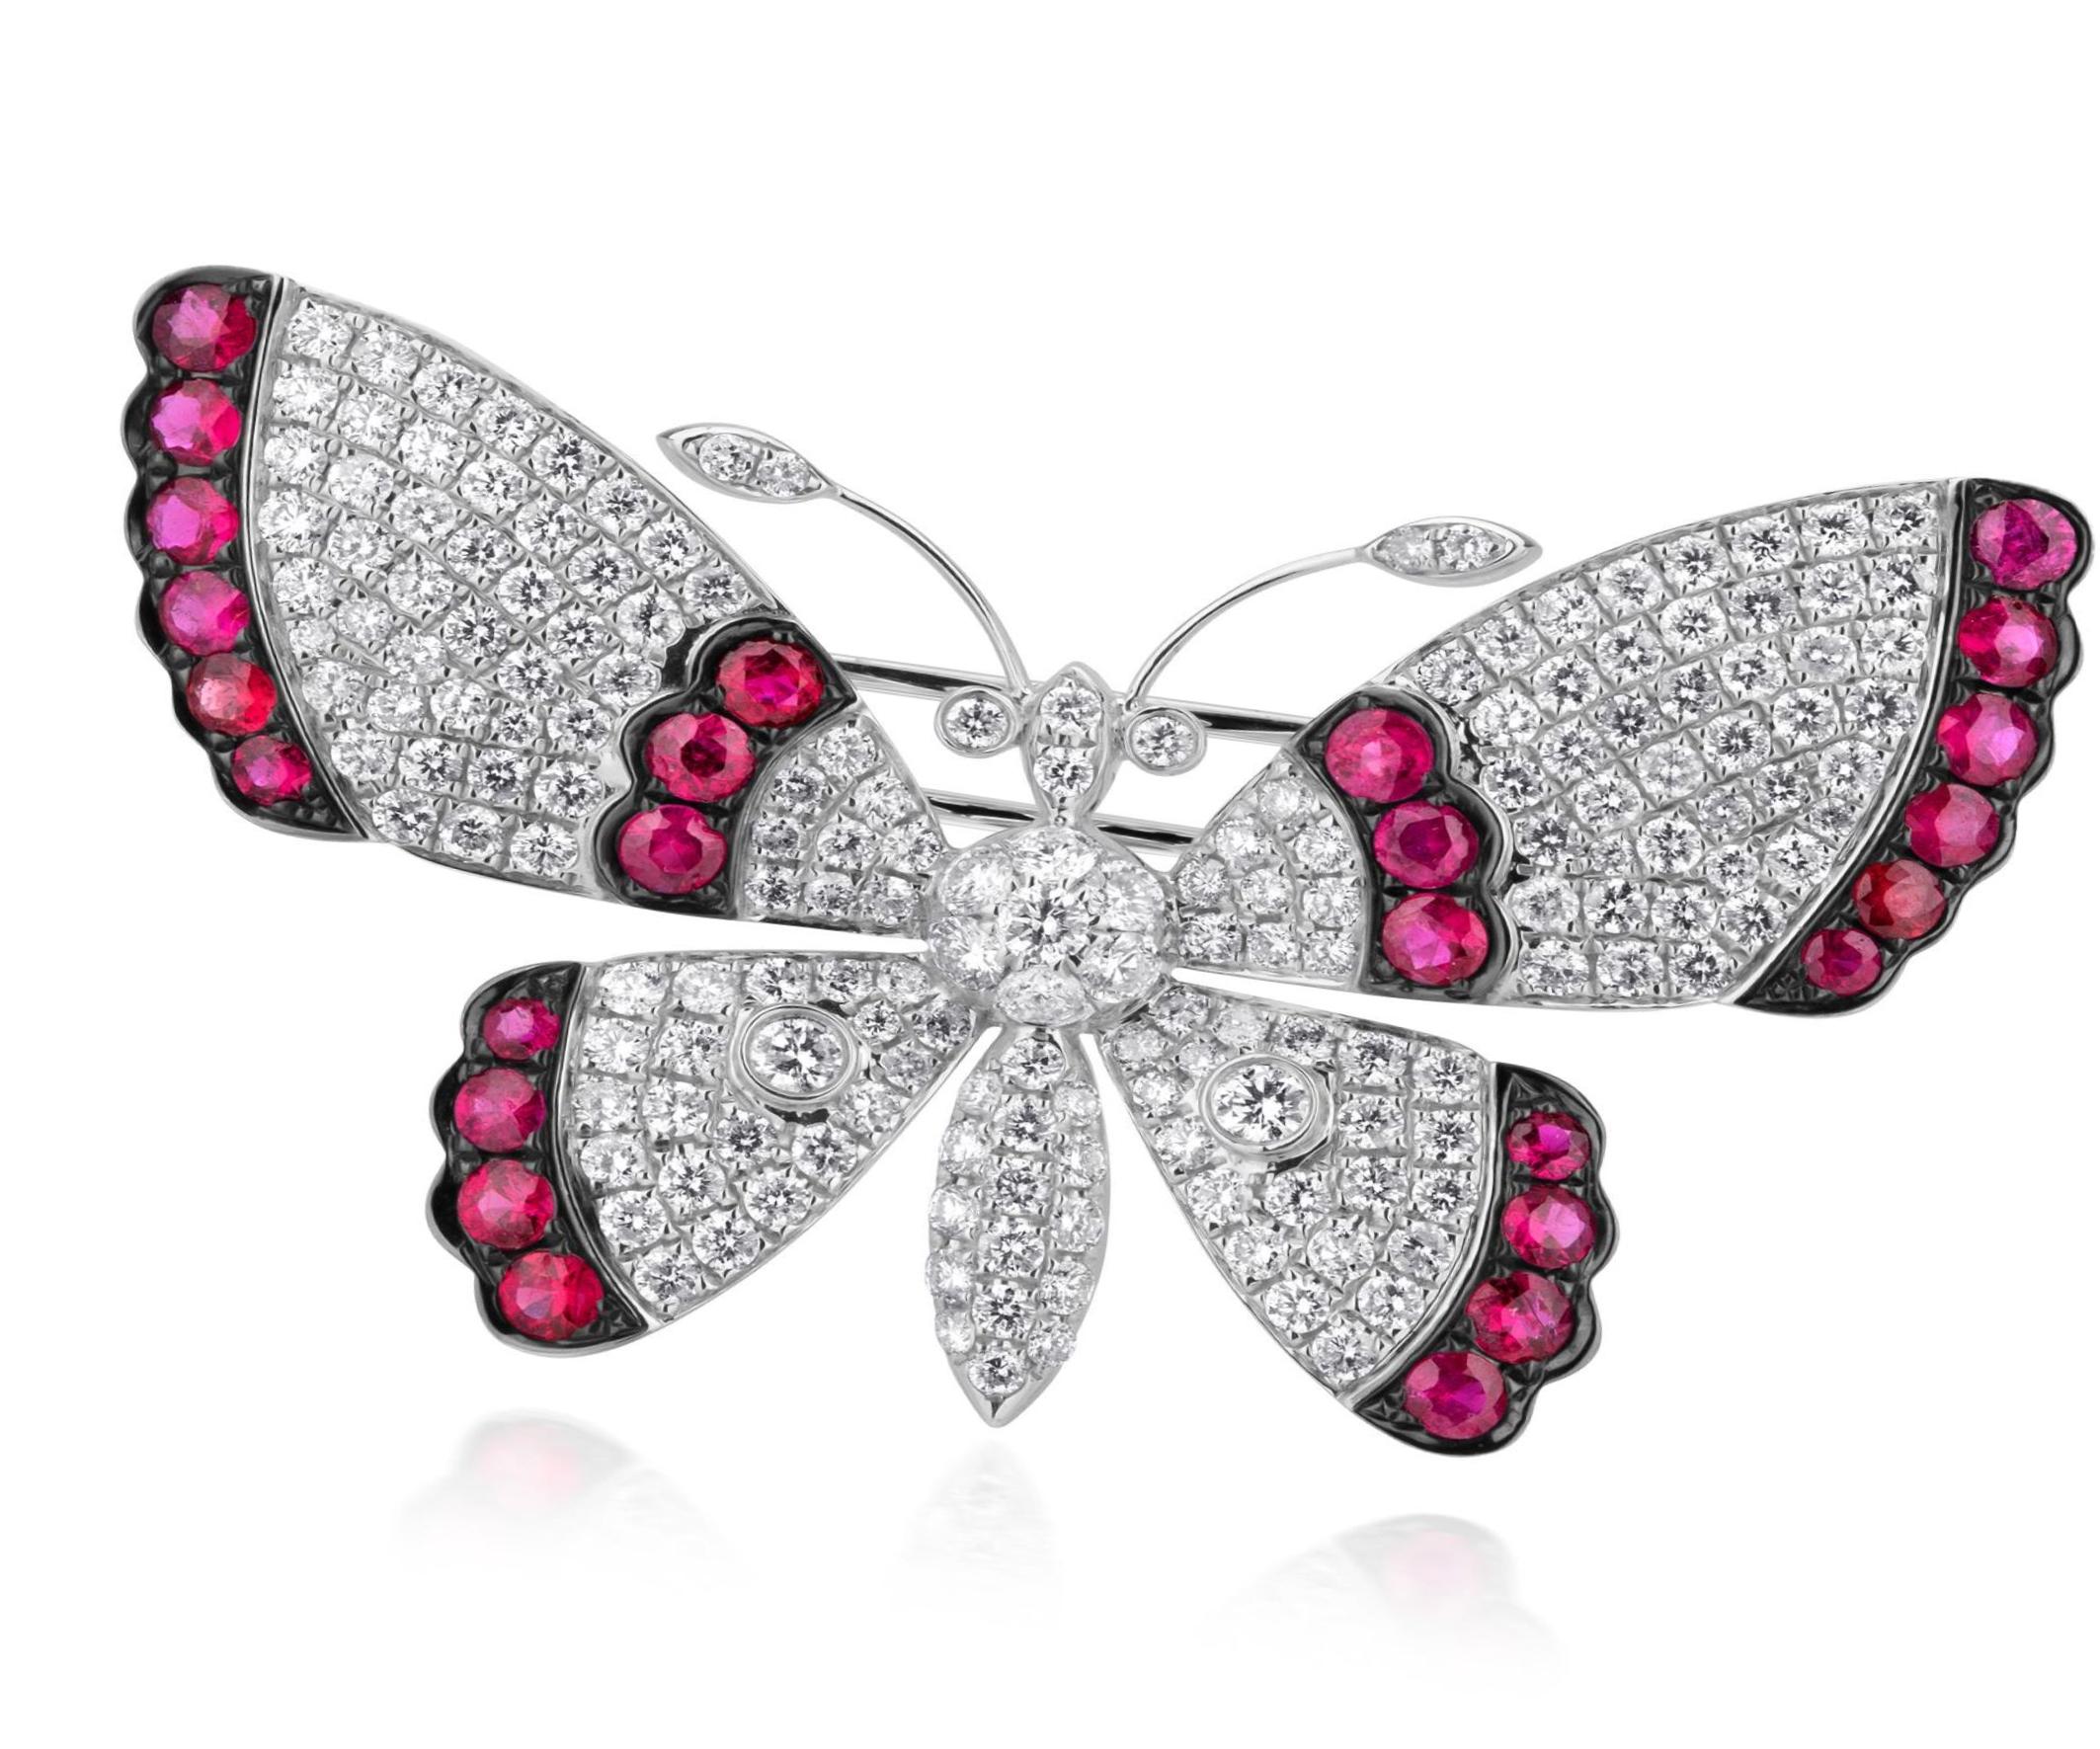 Round Cut 2.15 ct. t.w. Diamond and 1.45 ct. t.w. Ruby Butterfly Brooch in 18k White Gold